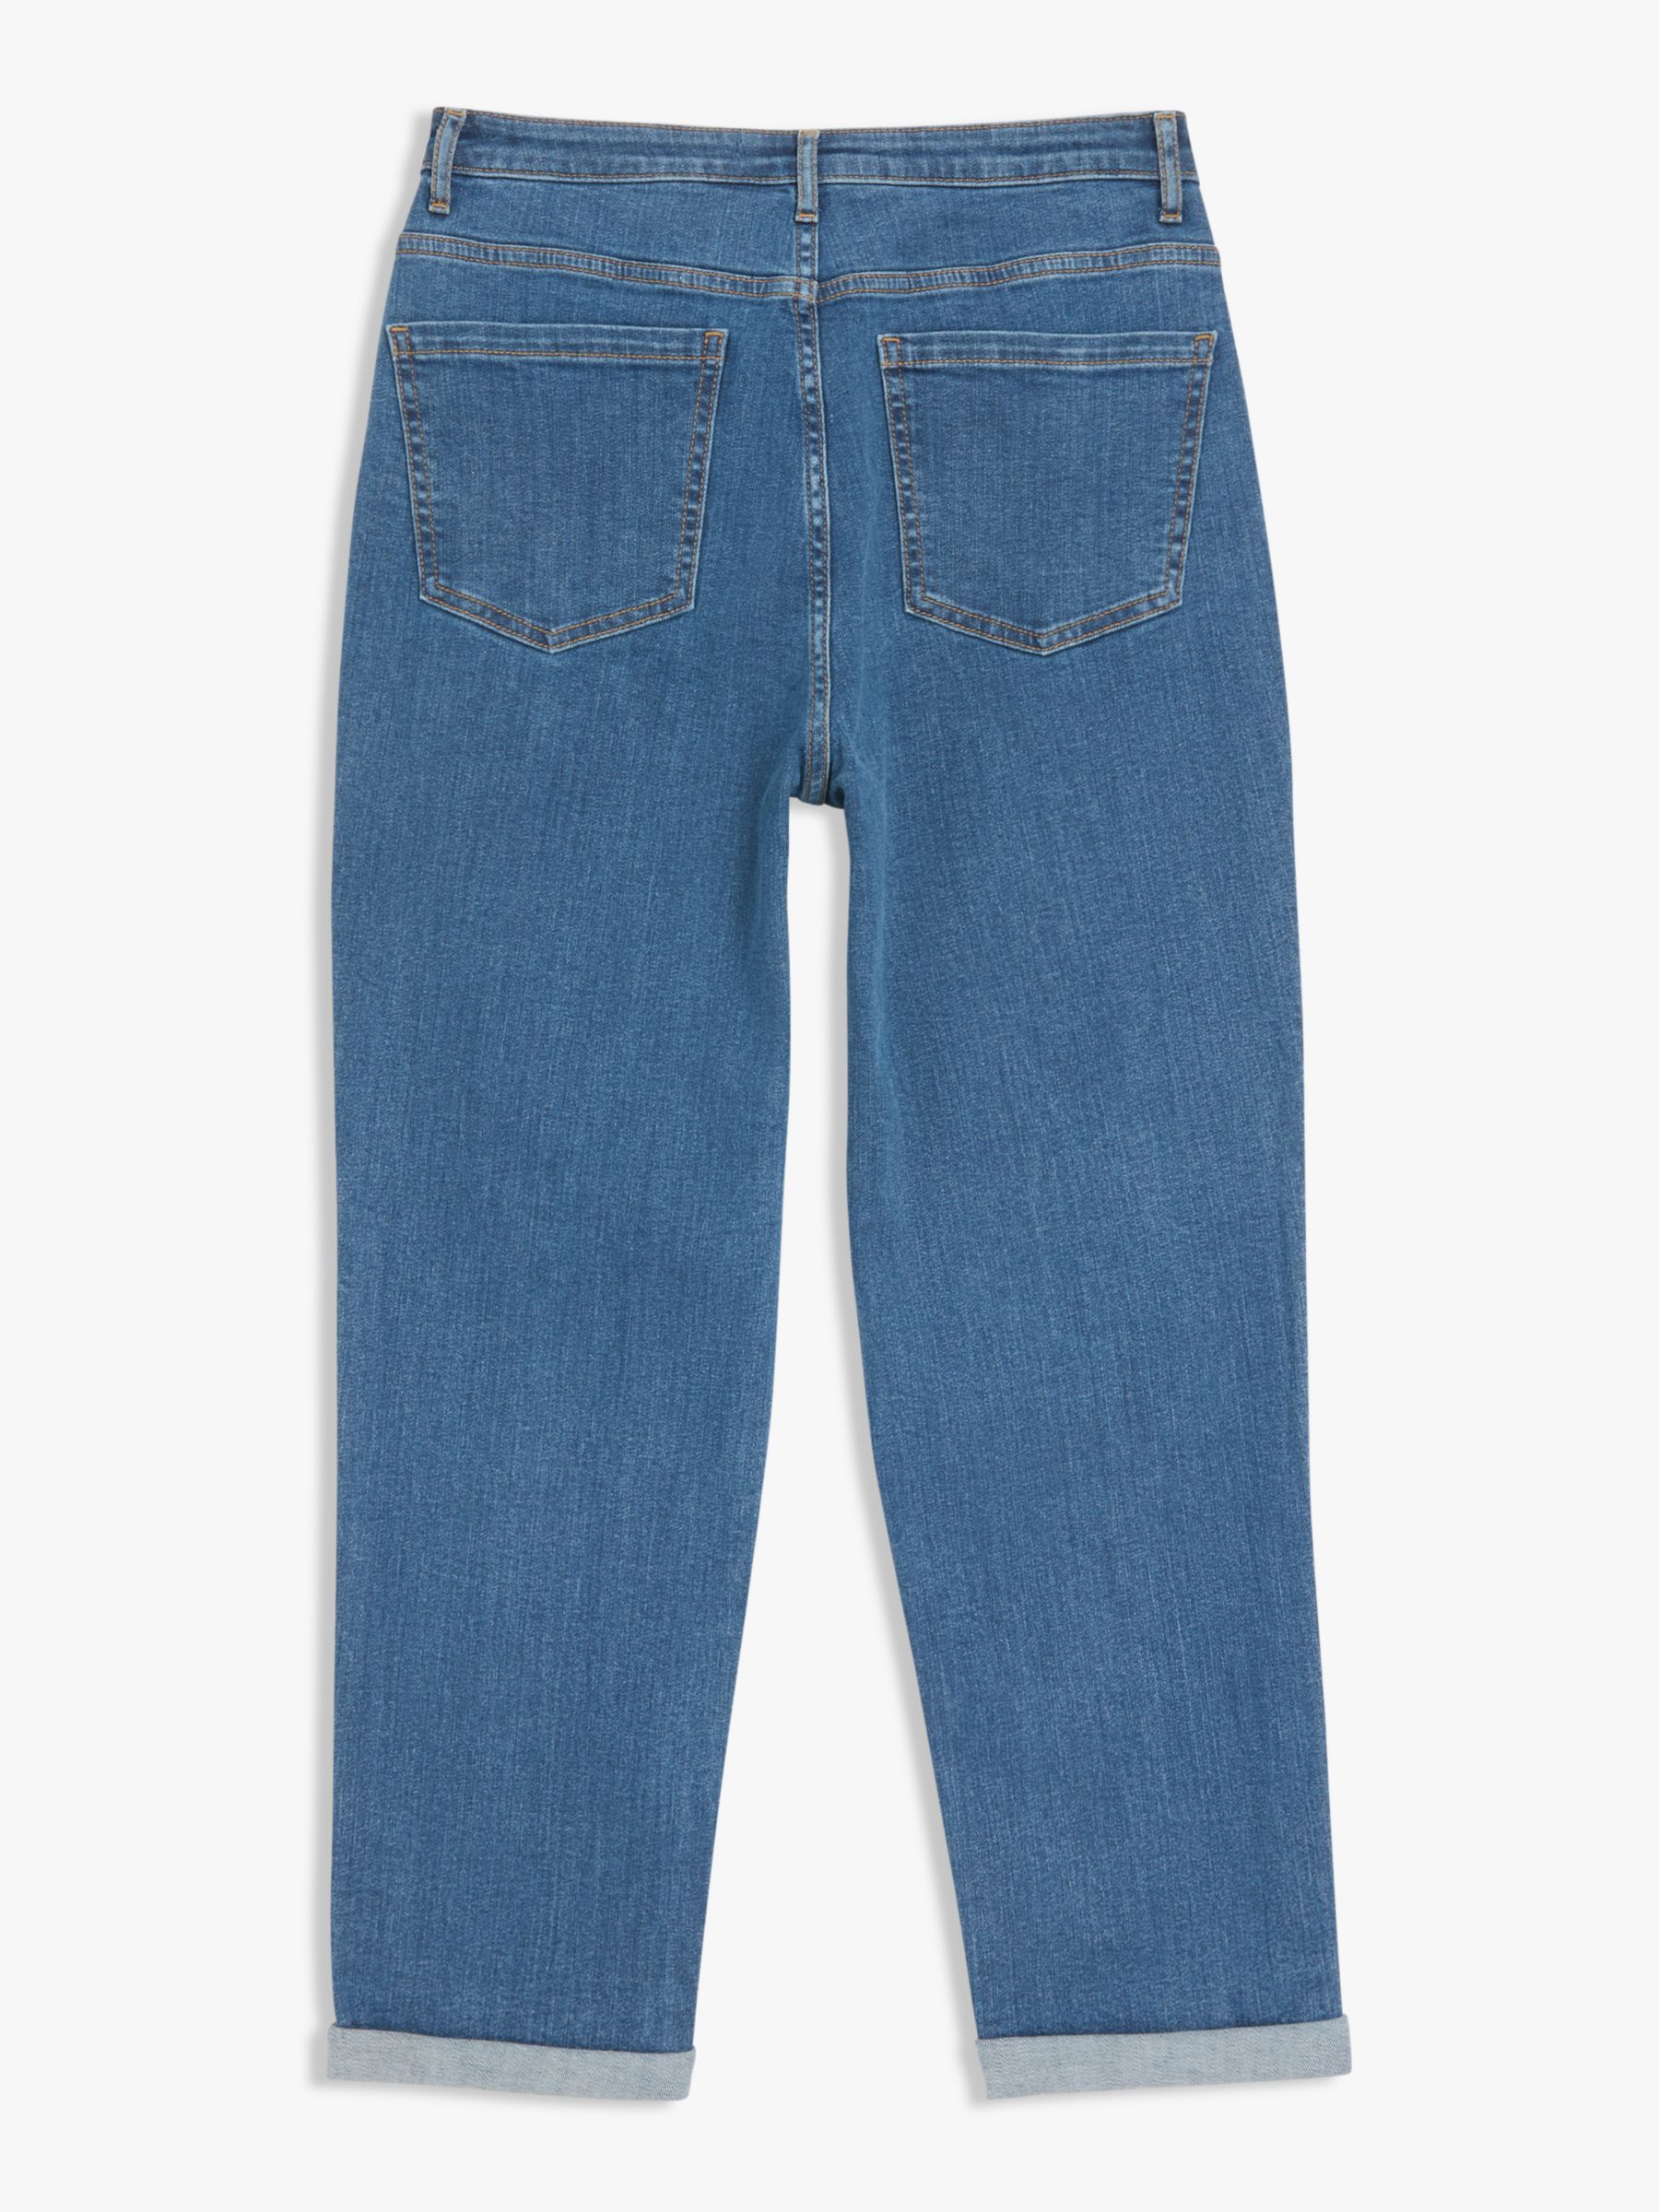 John Lewis ANYDAY Hoxton Mom Jeans, Mid Wash, 6